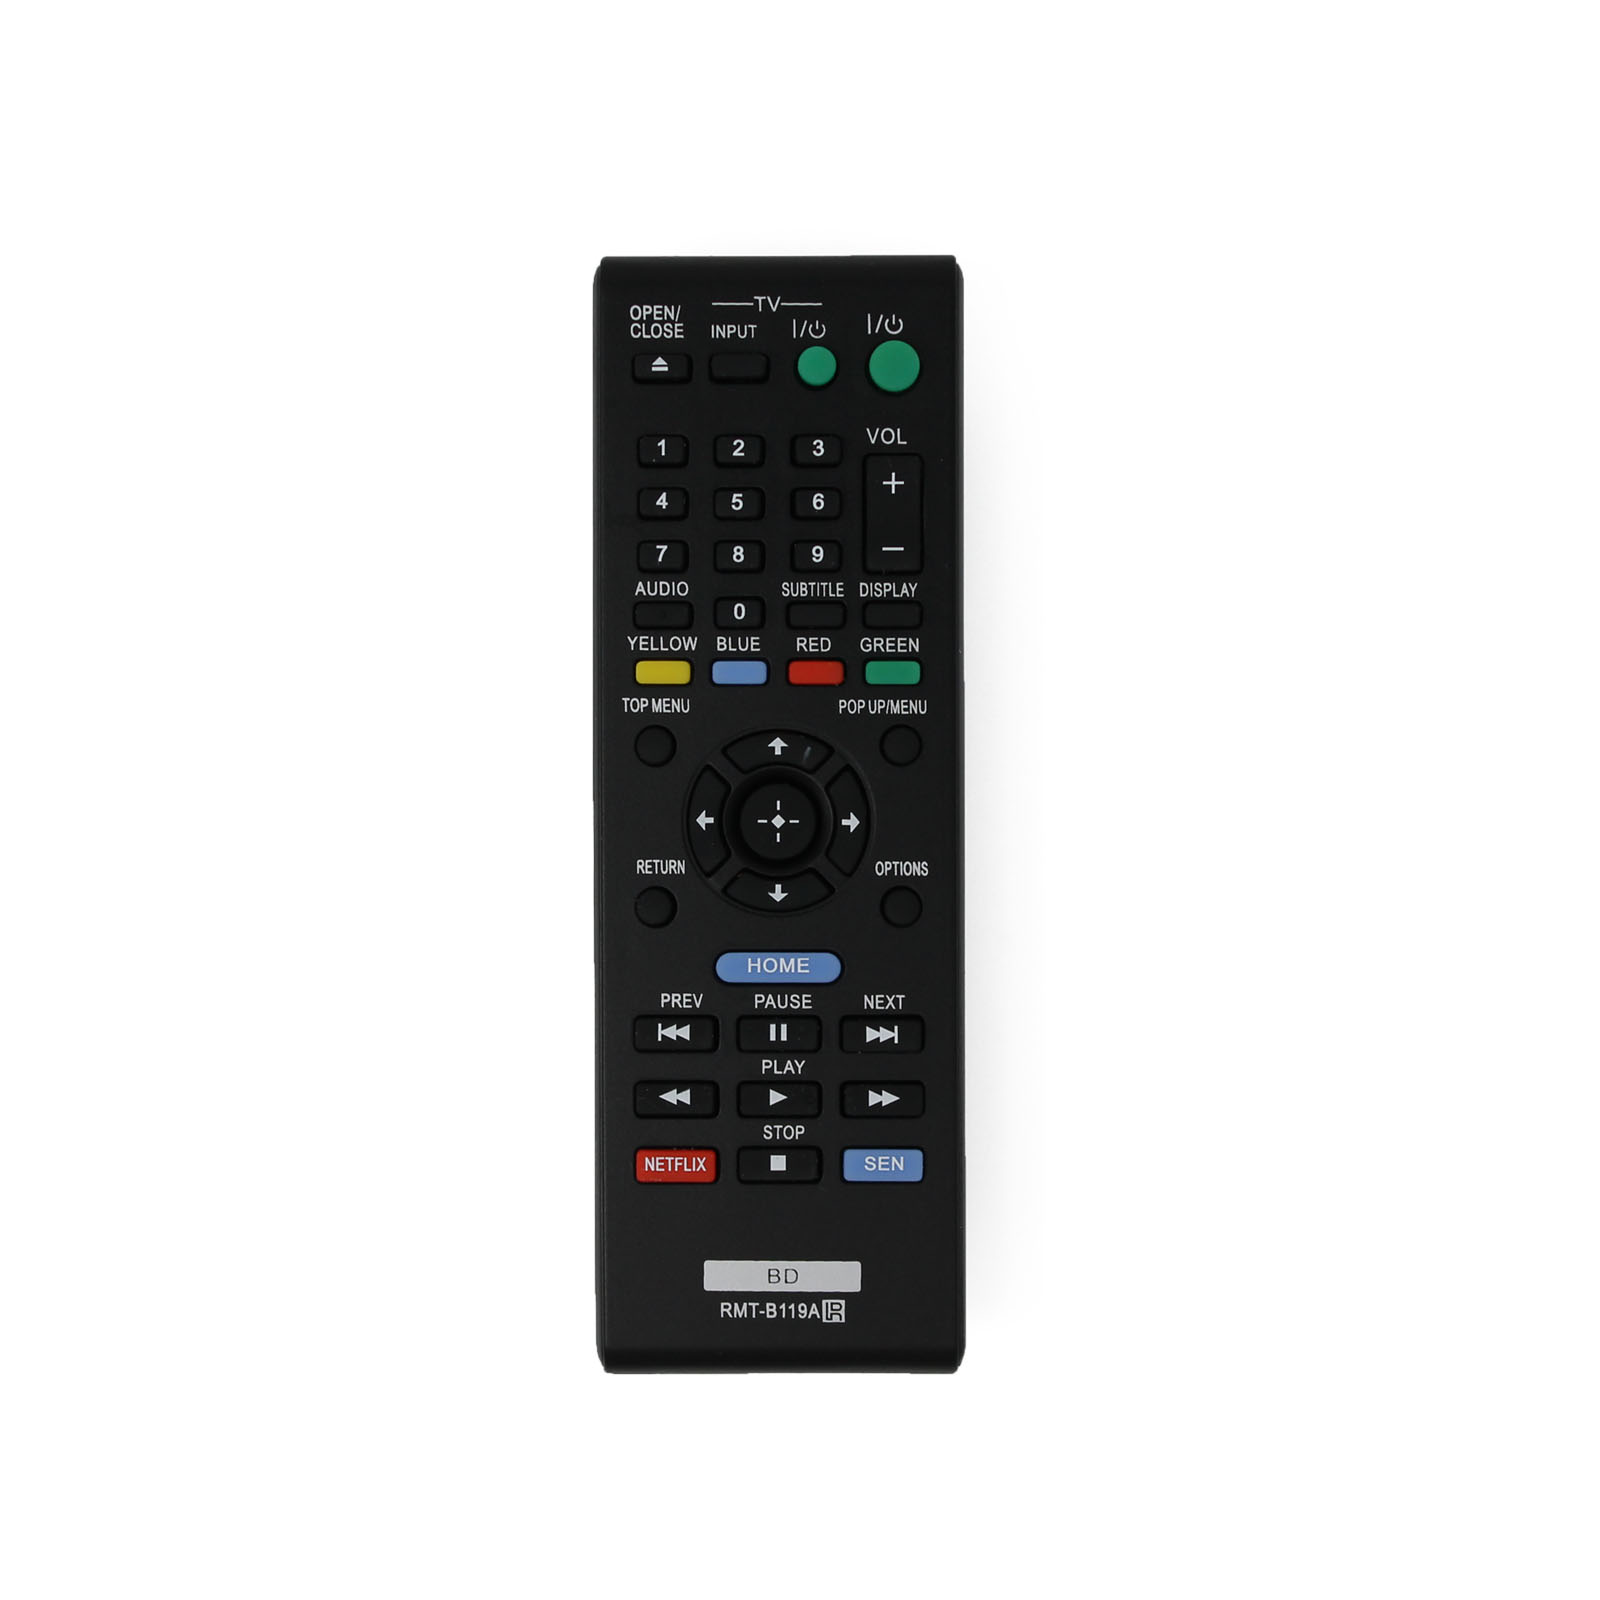 Replacement Sony RMT-B119A Blu-Ray Disc DVD Player Remote Control for Sony BDPS1100 Blu-Ray Disc DVD Player - image 1 of 4